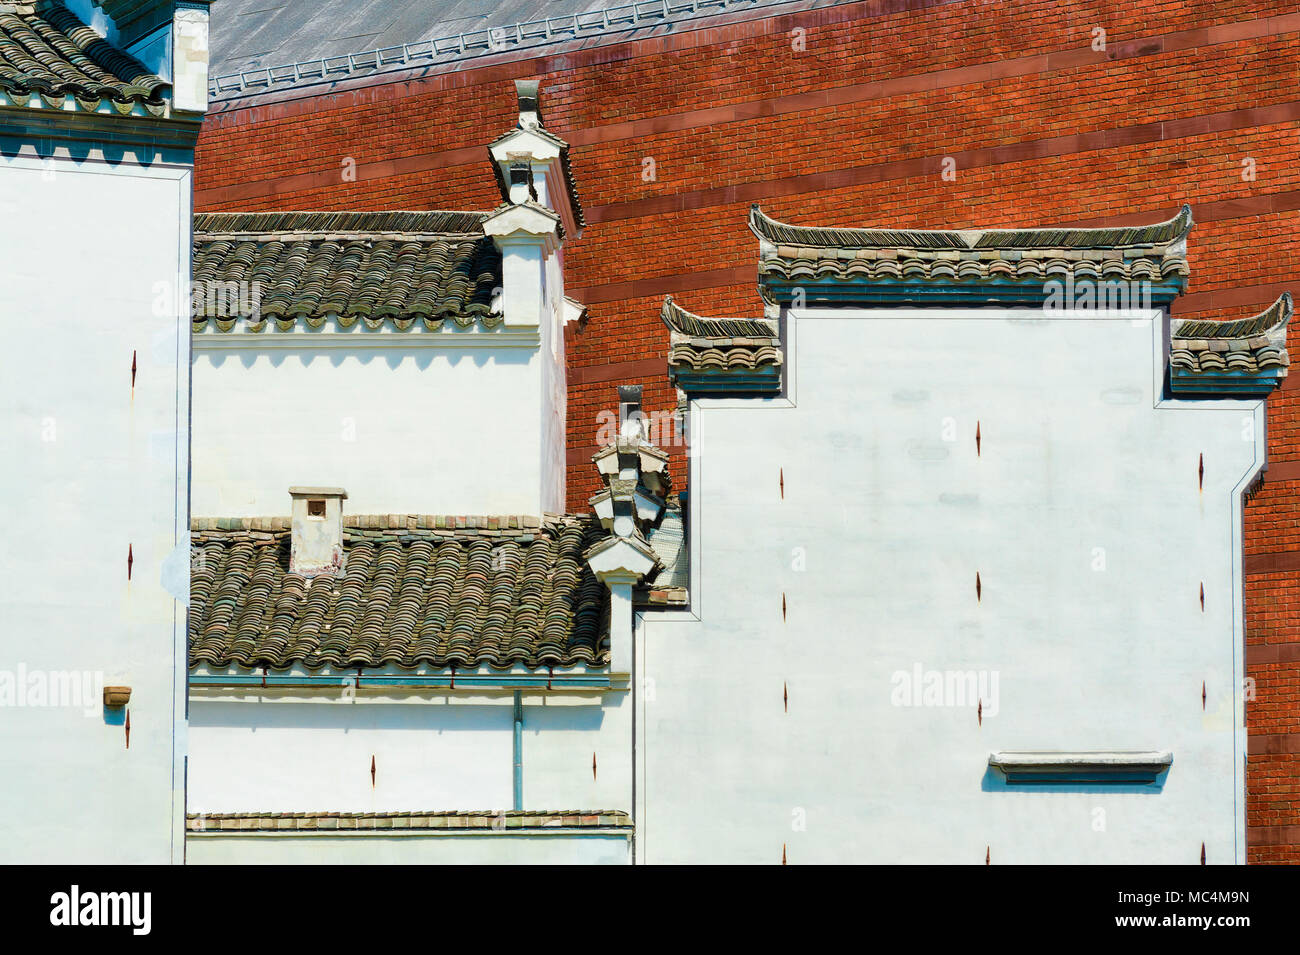 An abstract image reflecting two cultural architecture styles, brick federal and asian.  The contrasting colors and textures makes it an interesting s Stock Photo